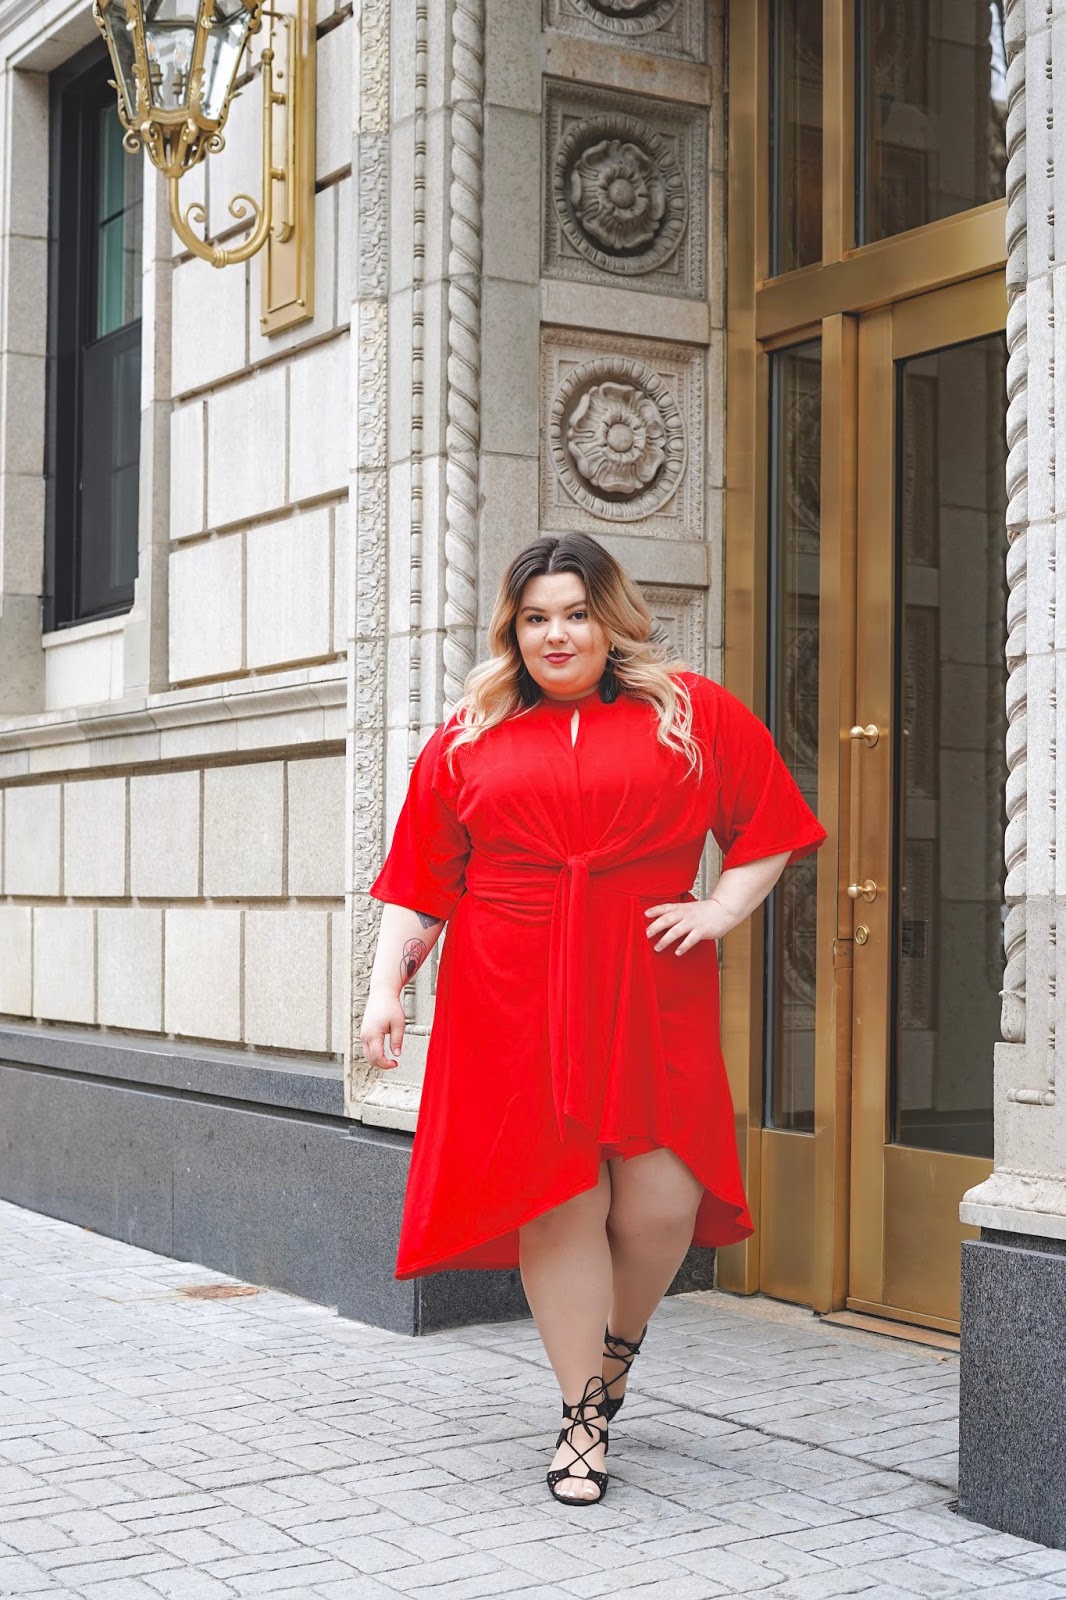 HOT DAMN — Natalie in the City - A Chicago Petite Plus Size Fashion ...